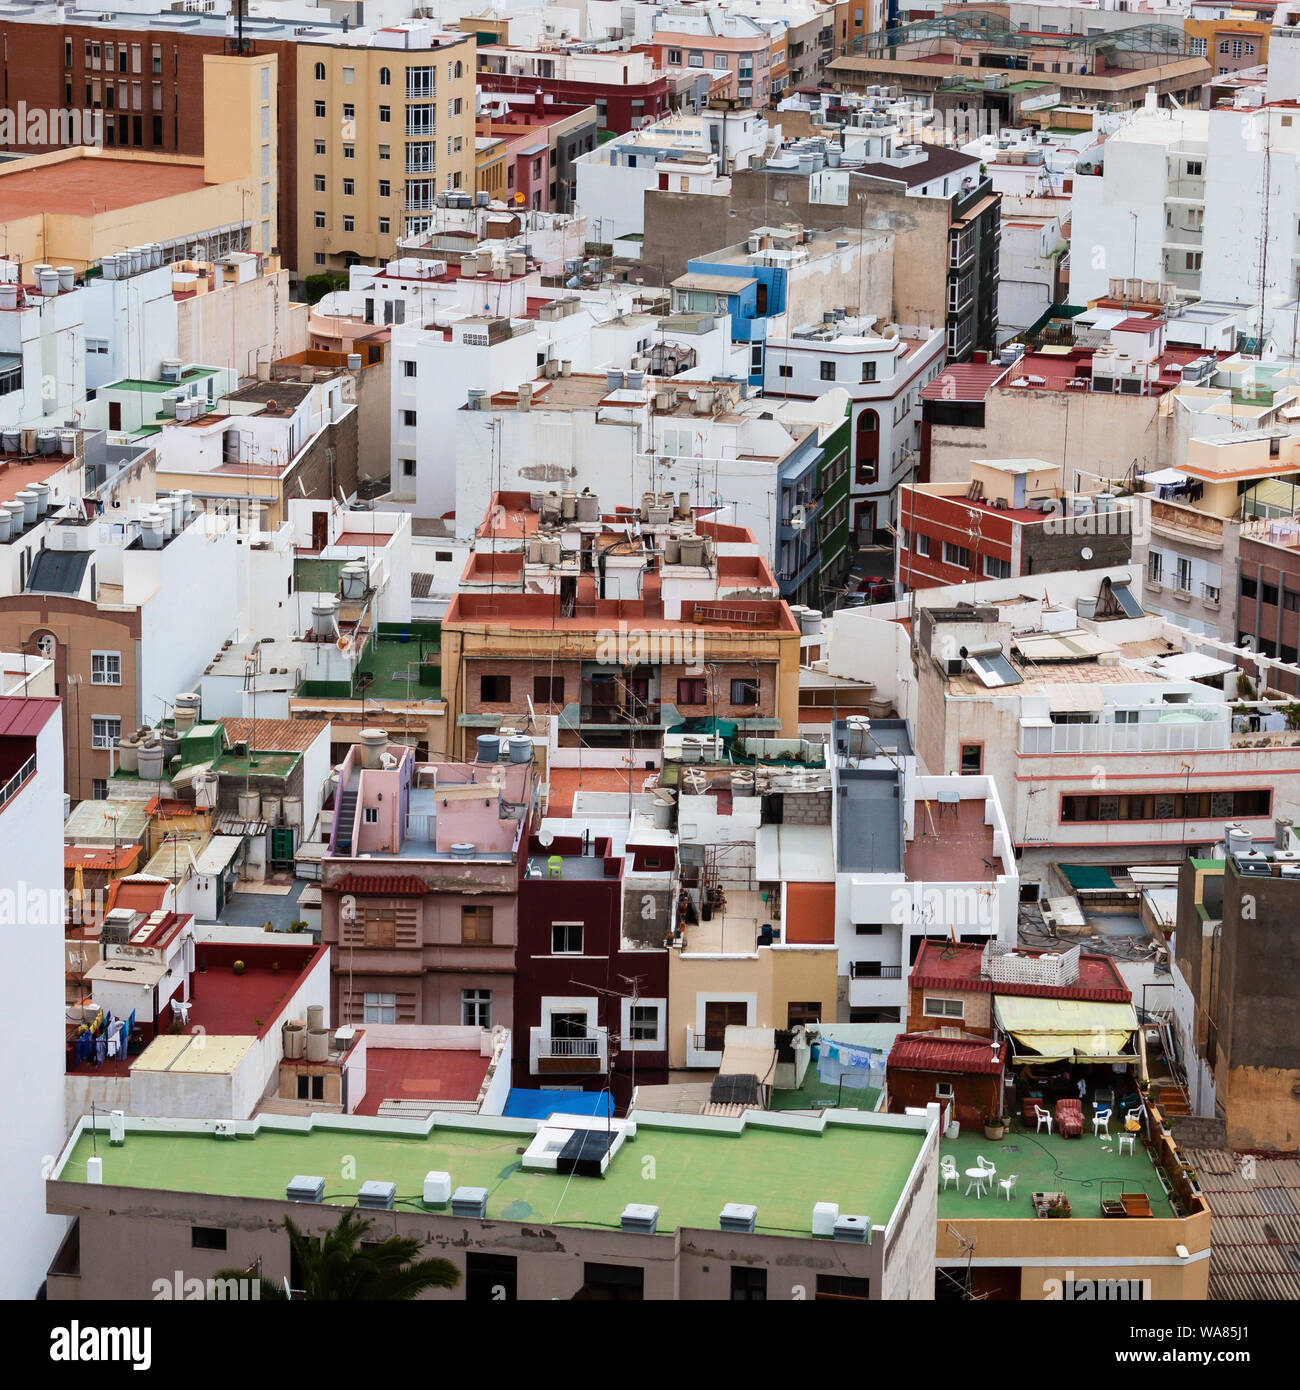 Colorful rooftops, showing the lifestyle in one of the neighborhoods in Las Palmas de Gran Canaria, Spain Stock Photo